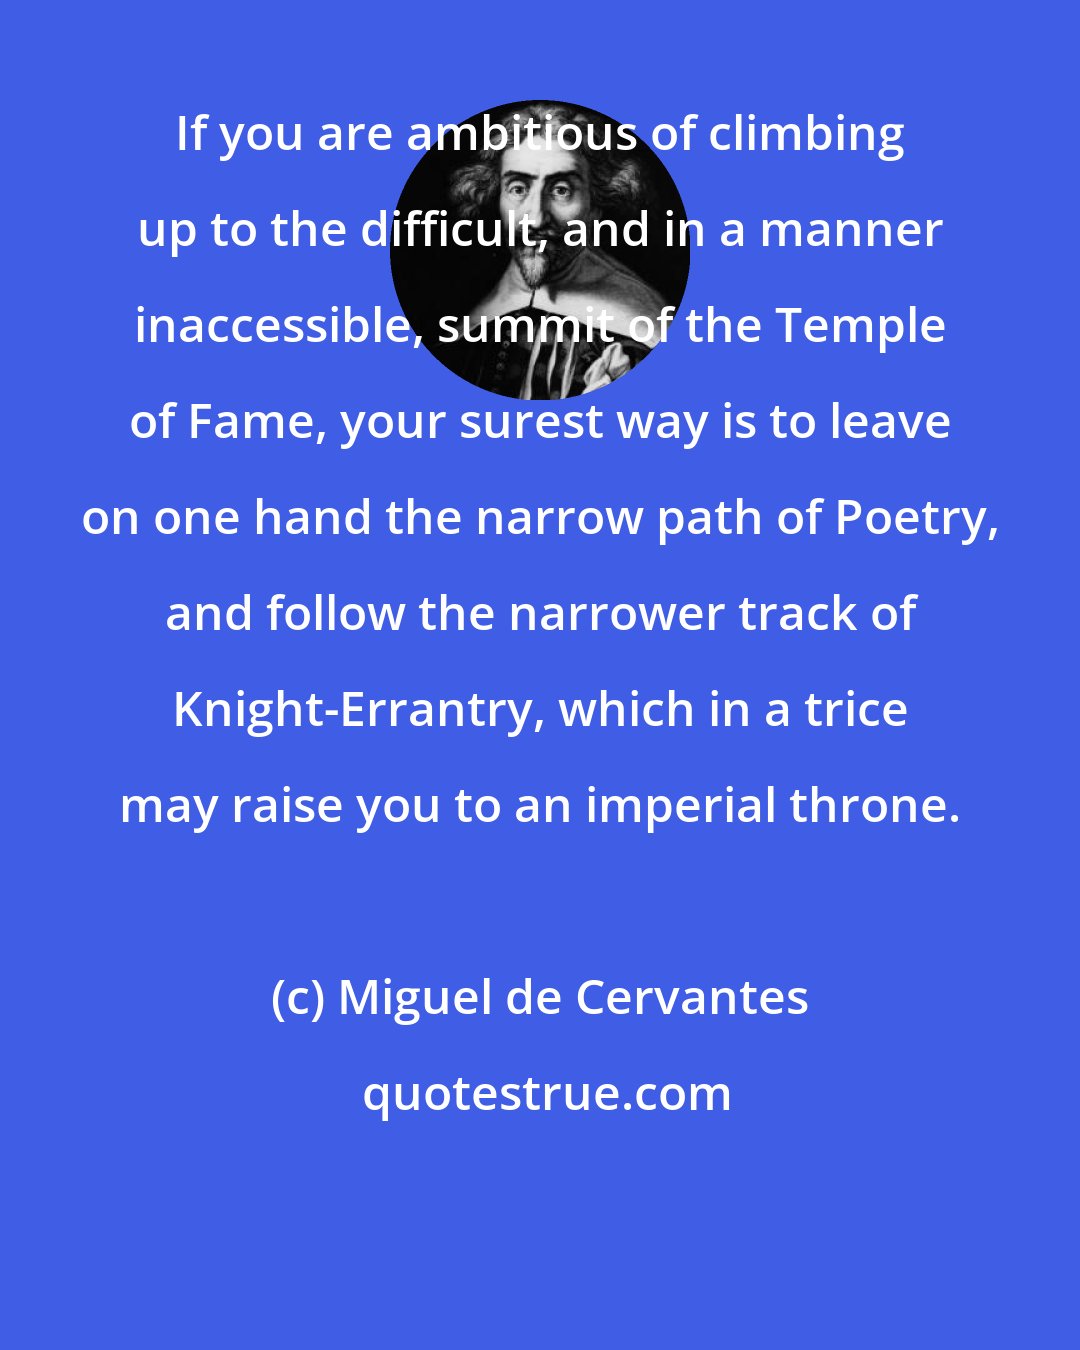 Miguel de Cervantes: If you are ambitious of climbing up to the difficult, and in a manner inaccessible, summit of the Temple of Fame, your surest way is to leave on one hand the narrow path of Poetry, and follow the narrower track of Knight-Errantry, which in a trice may raise you to an imperial throne.